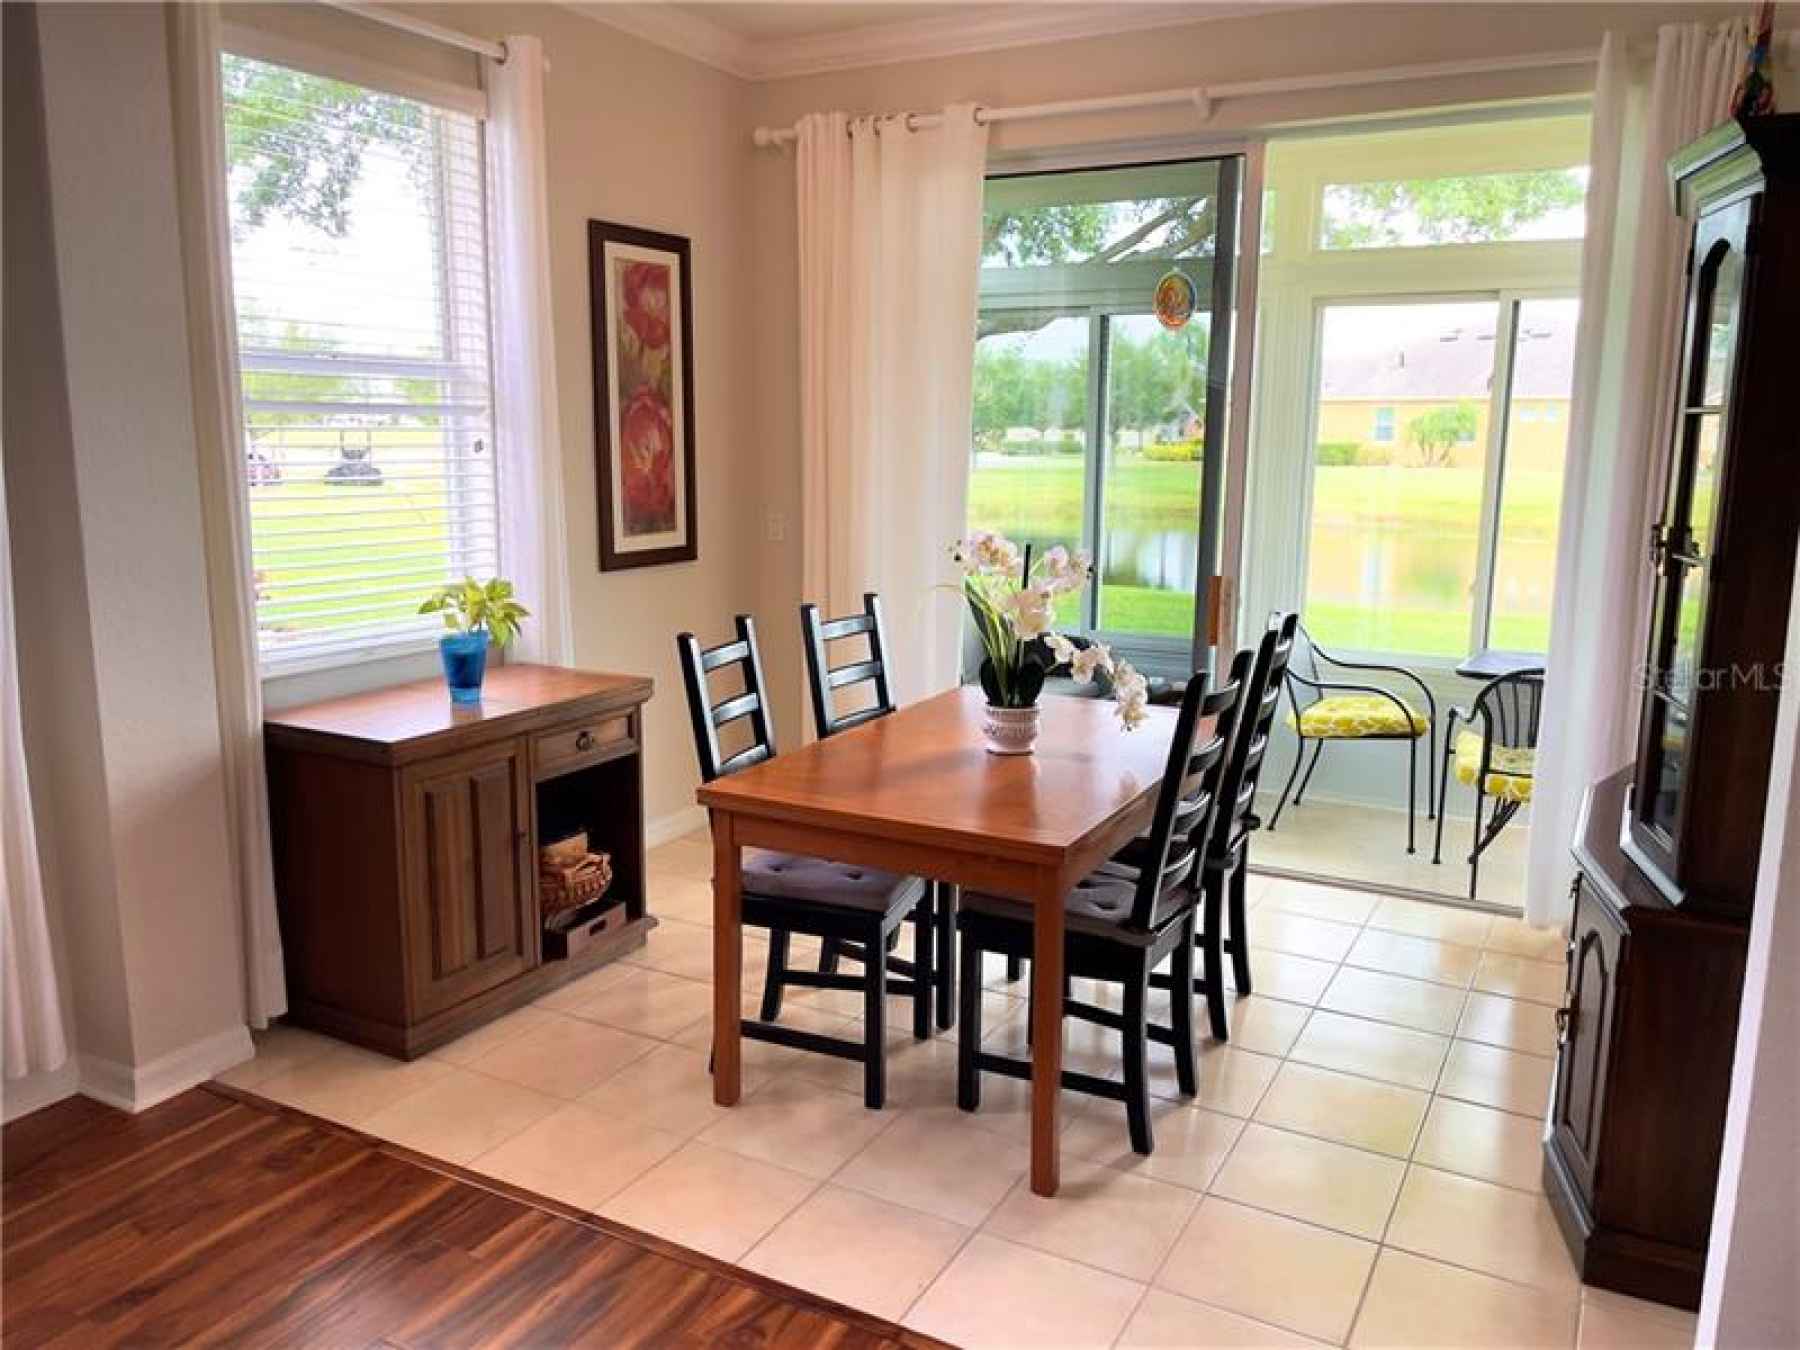 Dining room with view of enclosed lanai and pond.